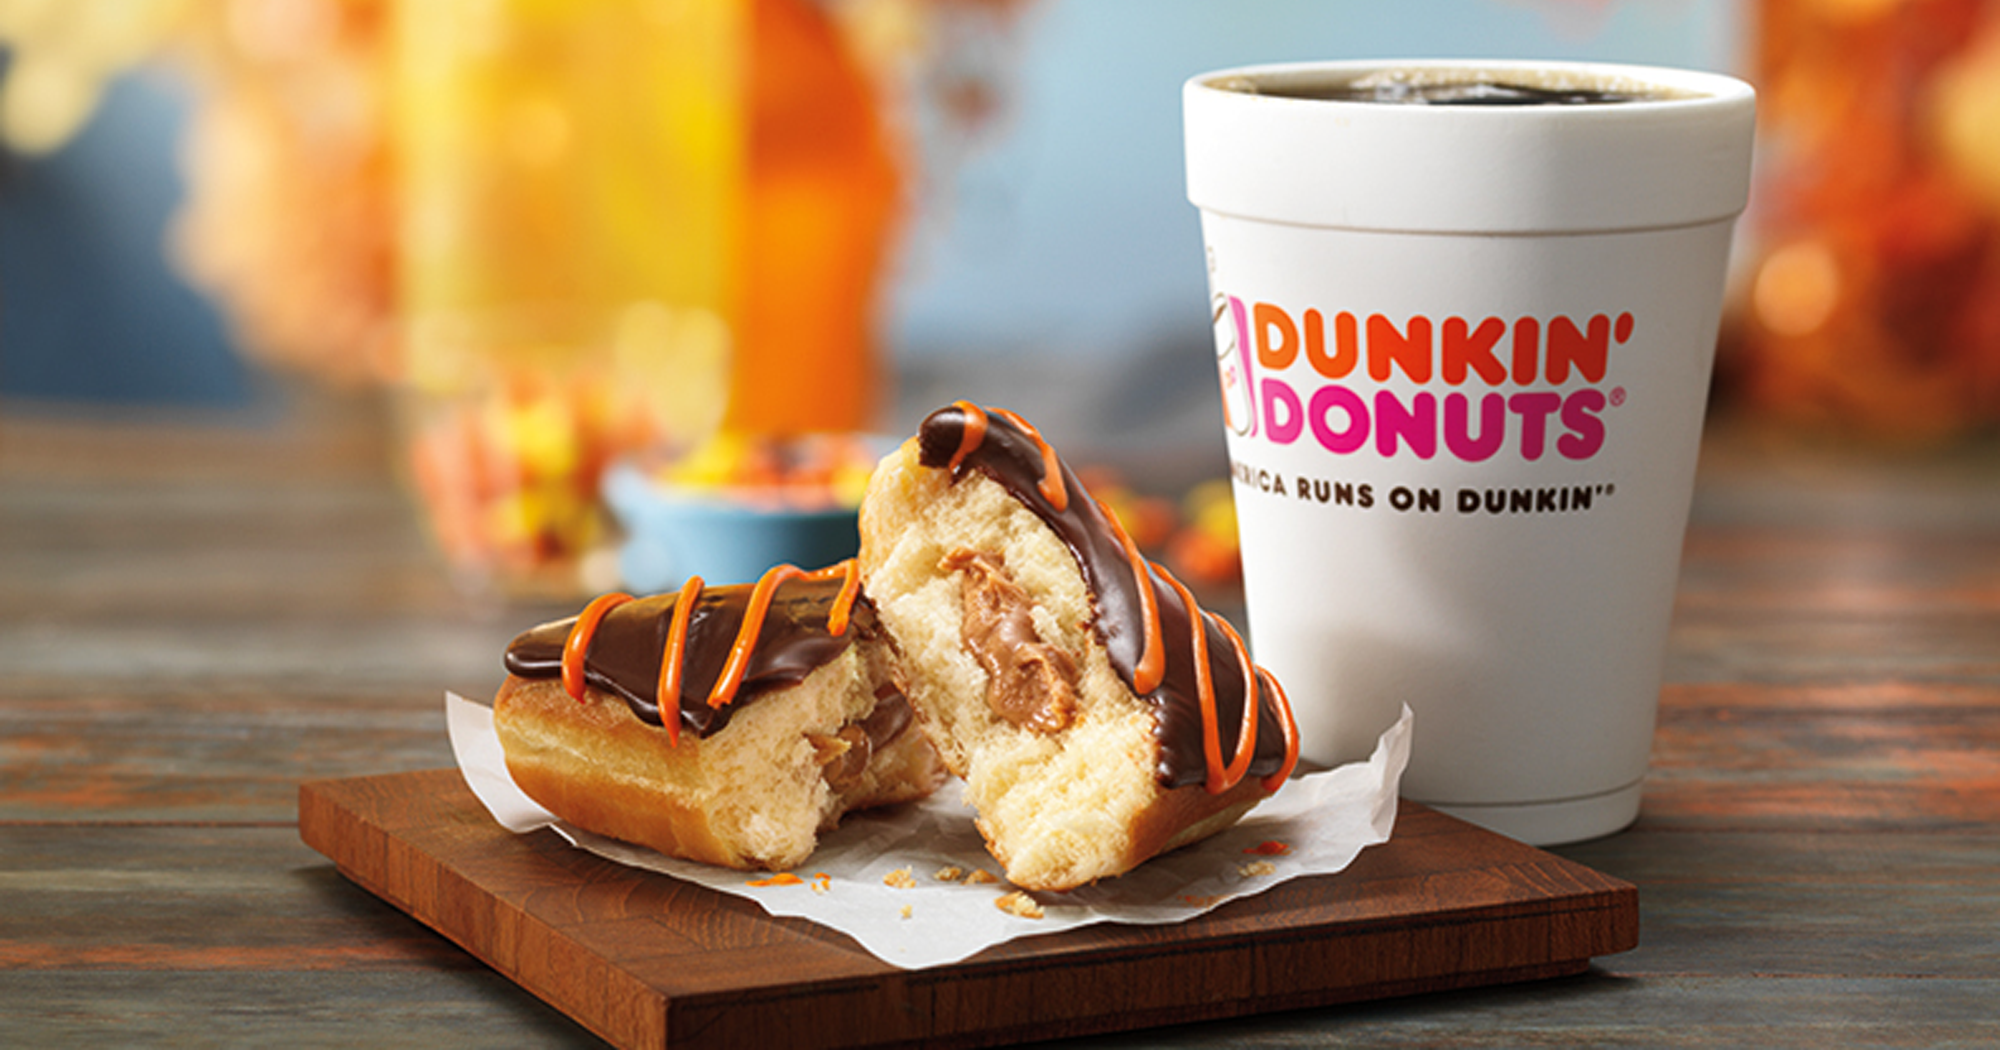 What are Dunkin donuts fall flavors?